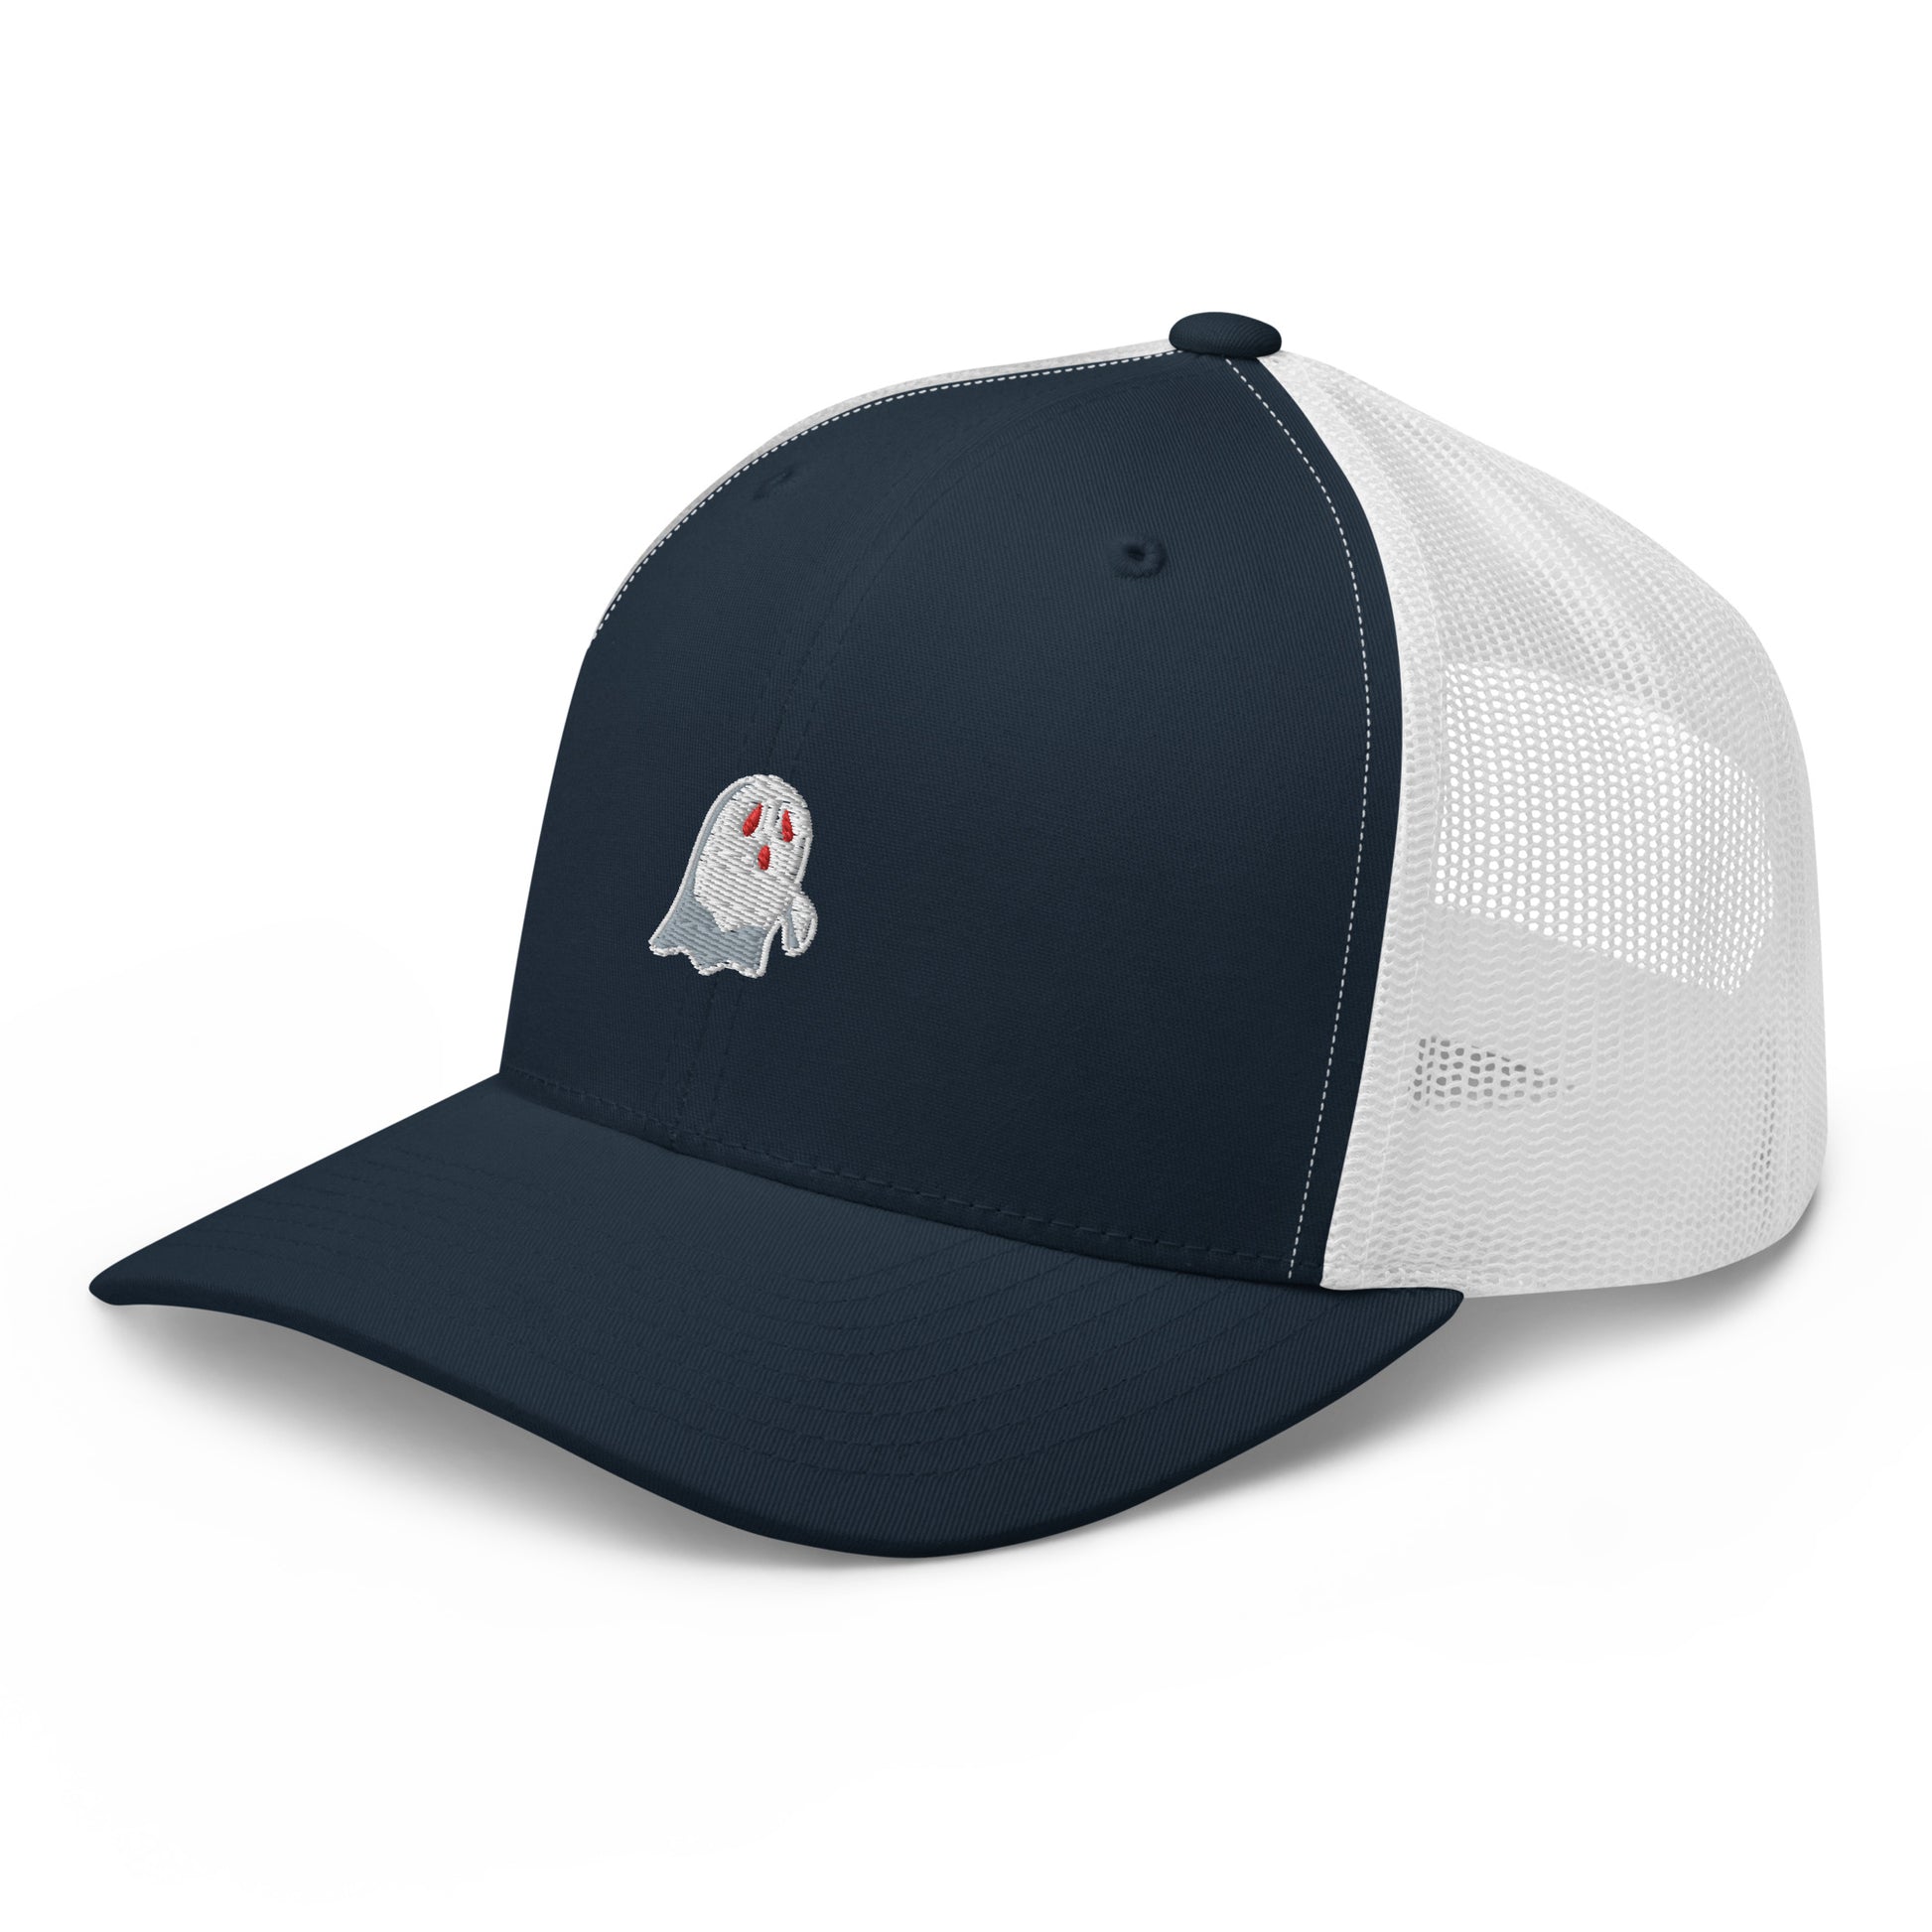  cap-from-the-front-with-ghost-symbol